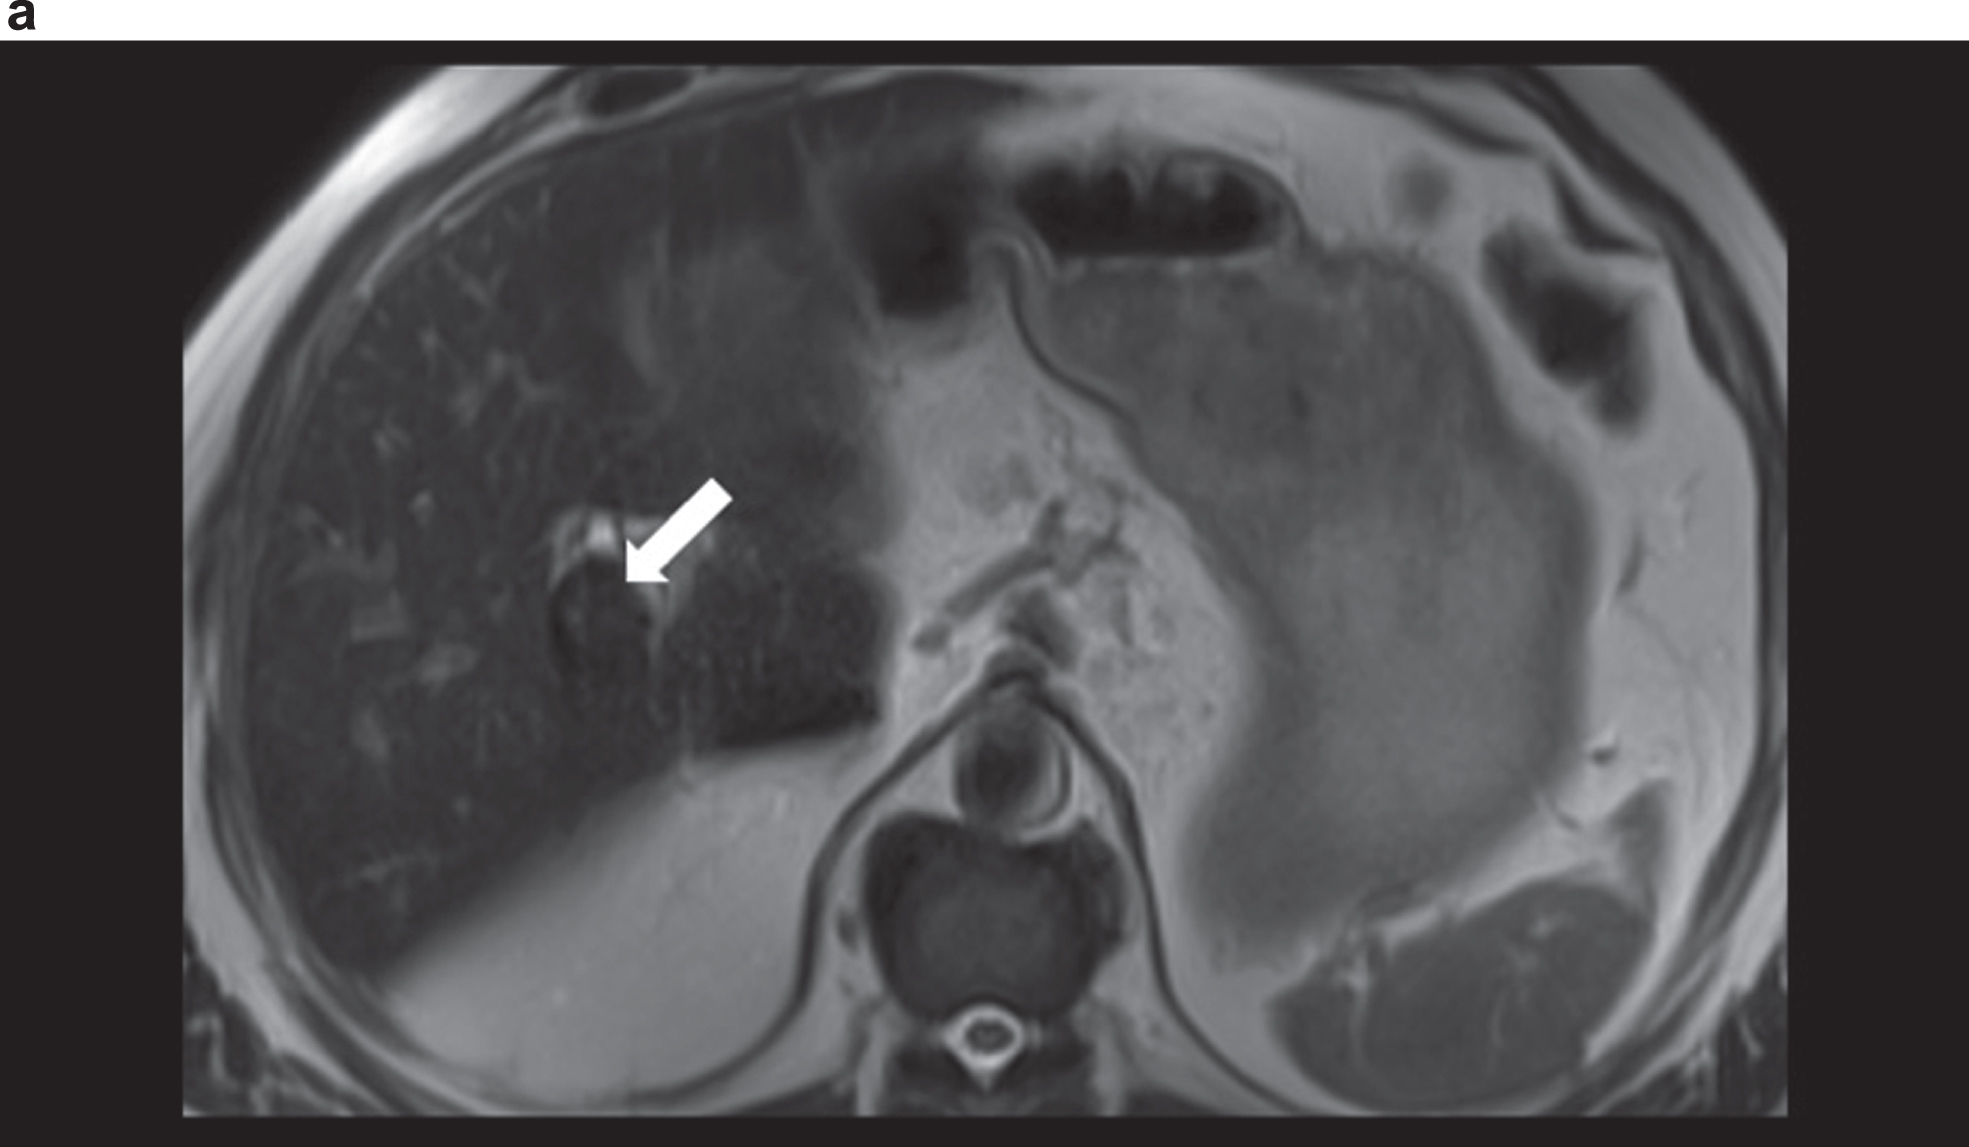 MRI in T2 weighted sequence with unclear vascularised structure (arrow) at the hepatic hilus with signal change.